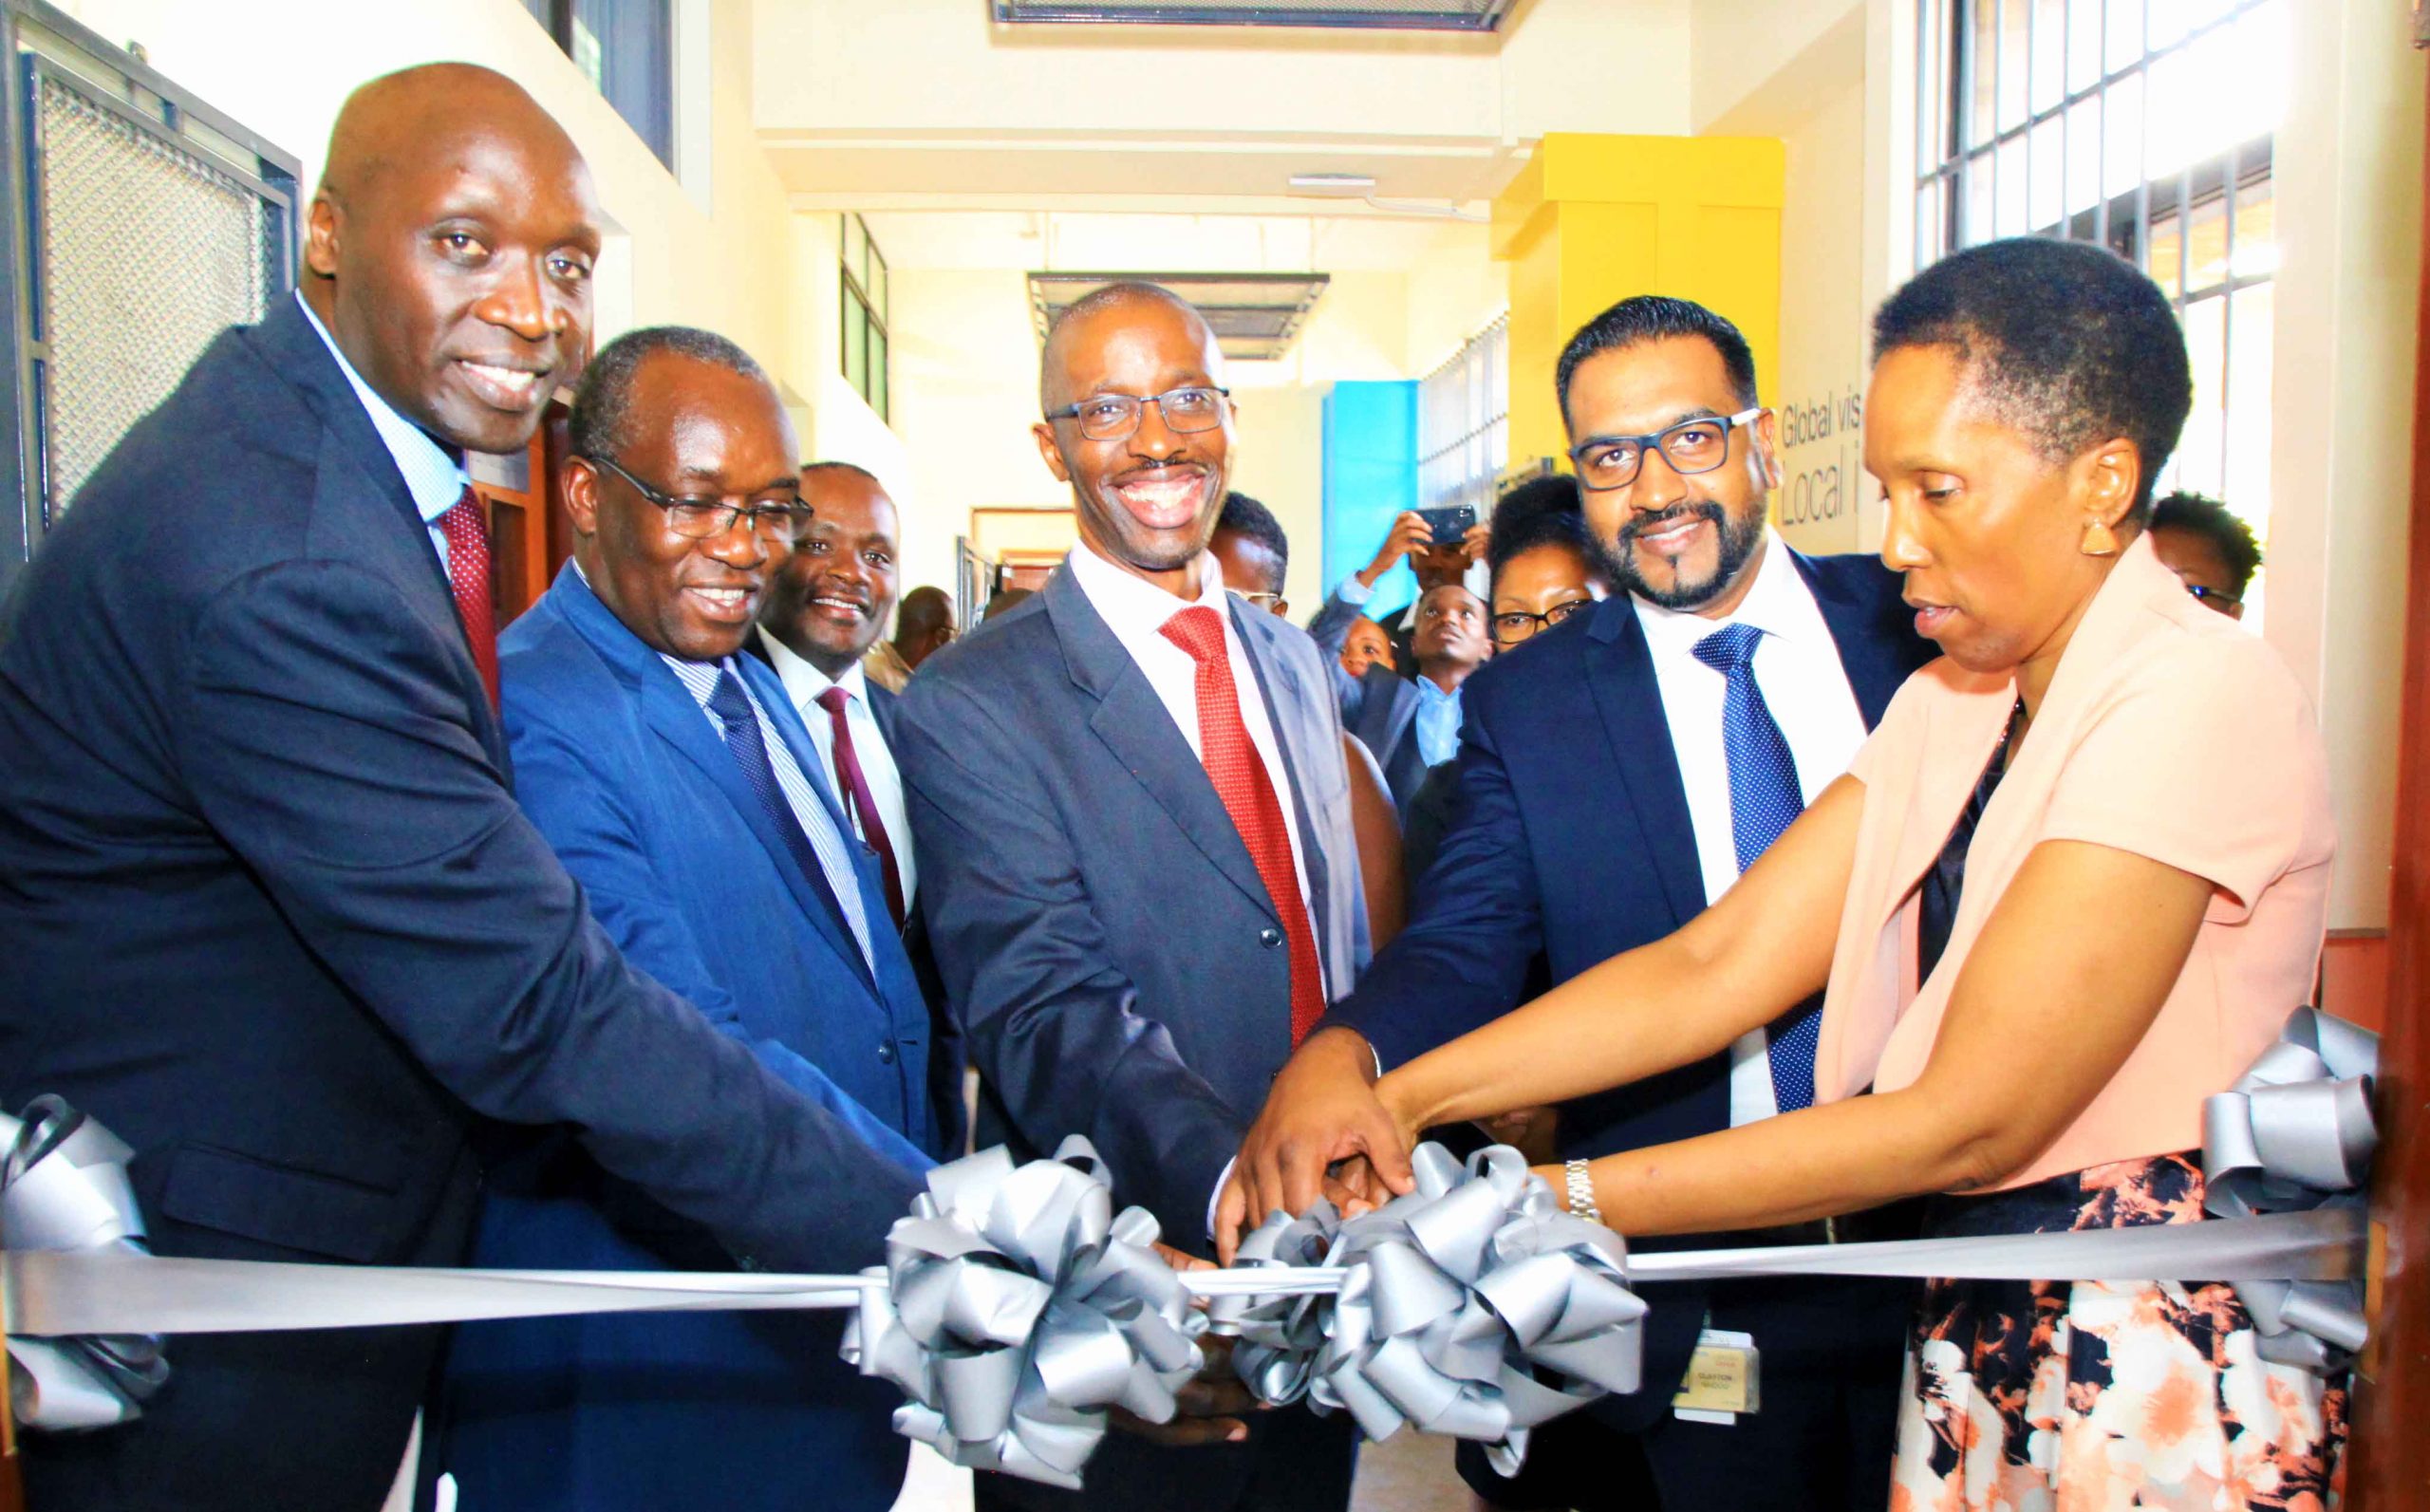 Cisco aims to empower SMMEs in Kenya by aligning with ‘Big 4 Agenda’